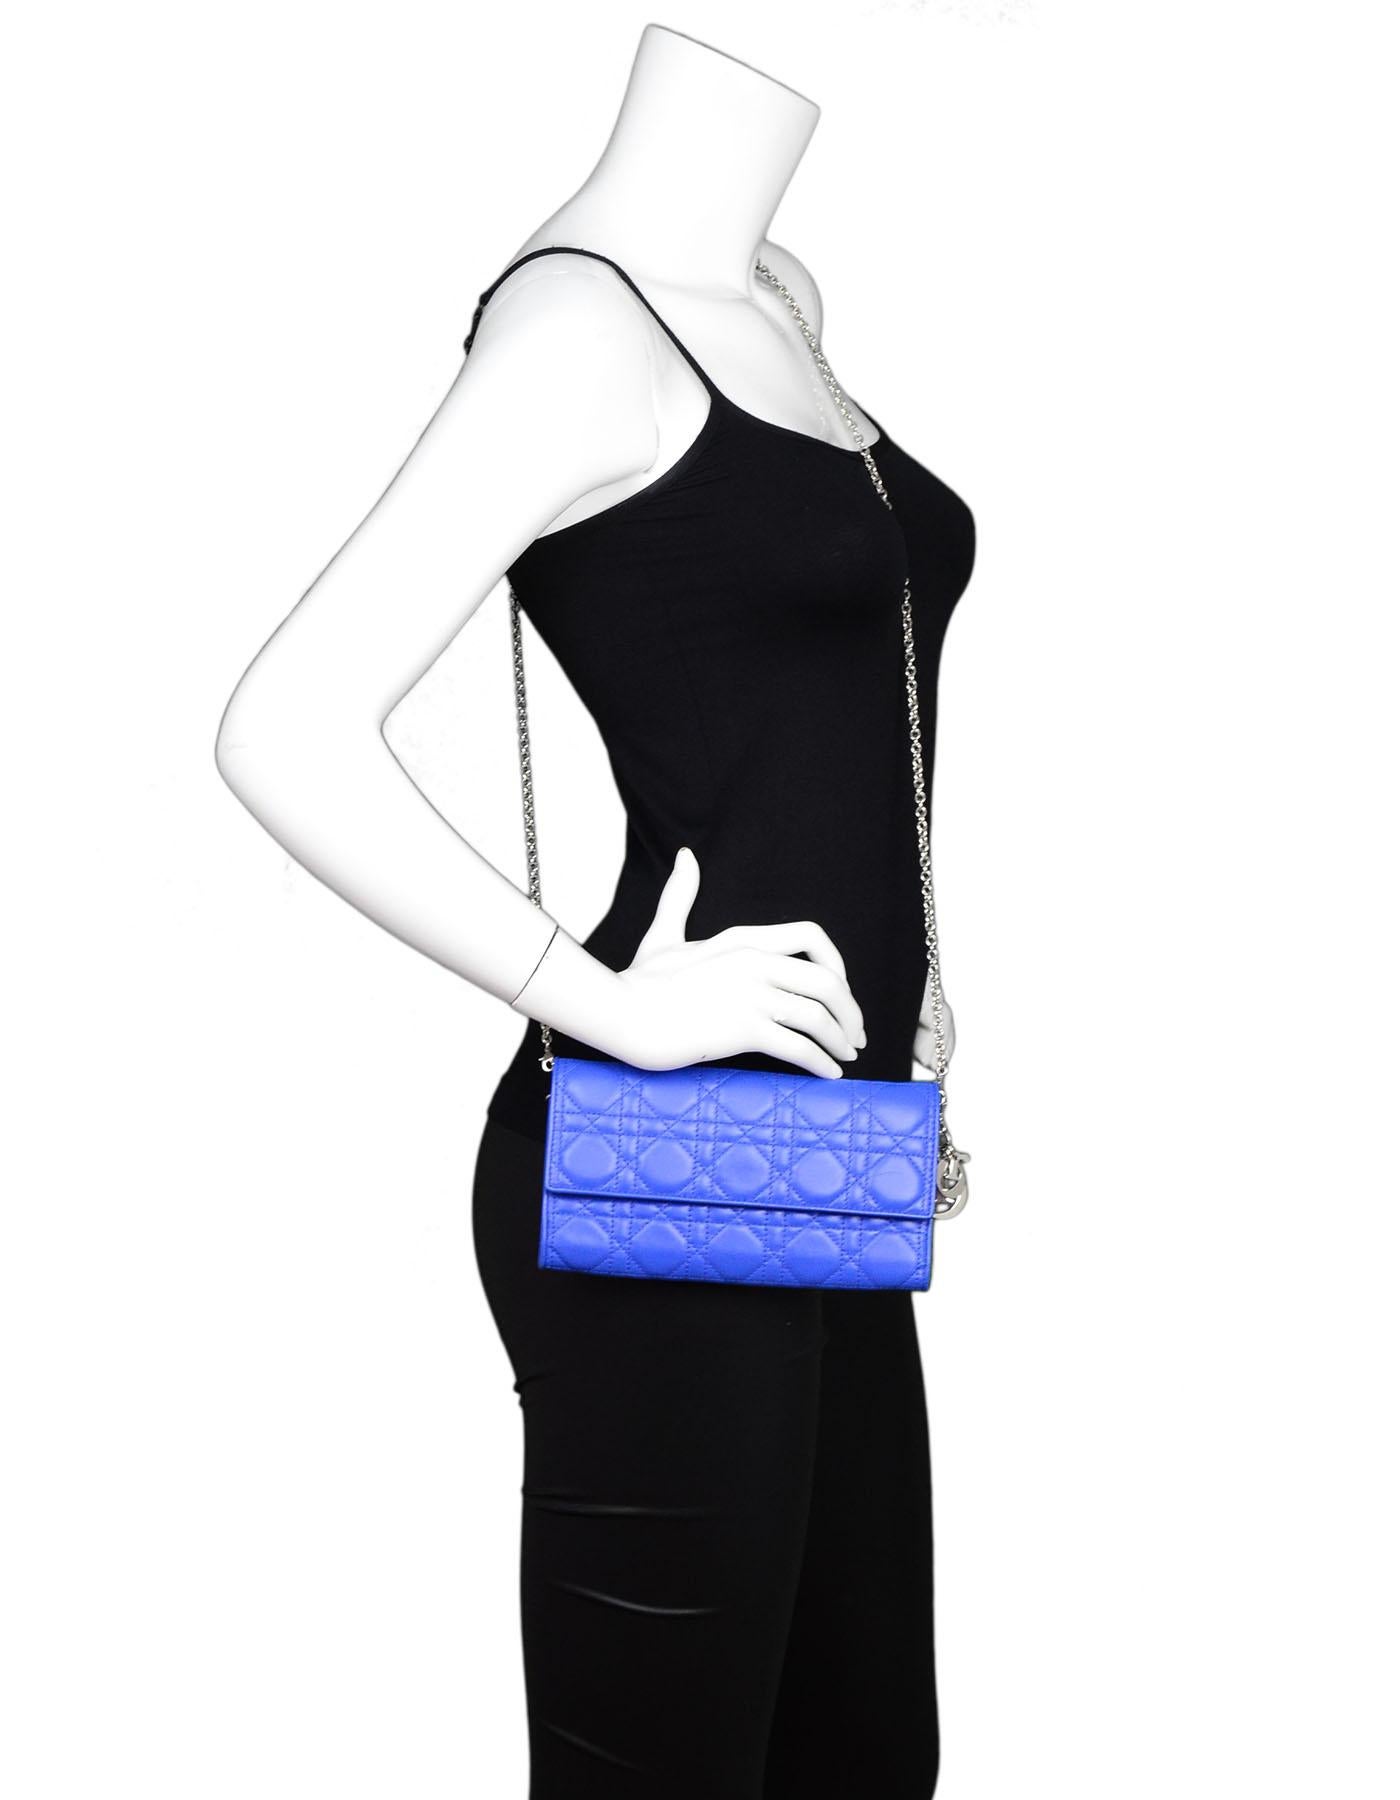 Christian Dior Cobalt Blue Cannage Quilted Rendezvous Wallet On Chain WOC

Made In: Italy
Color: Cobalt blue
Hardware: Silvertone
Materials: Lambskin leather, metal
Lining: Blue leather
Closure/Opening: Flap top with snap closure
Exterior Pockets: